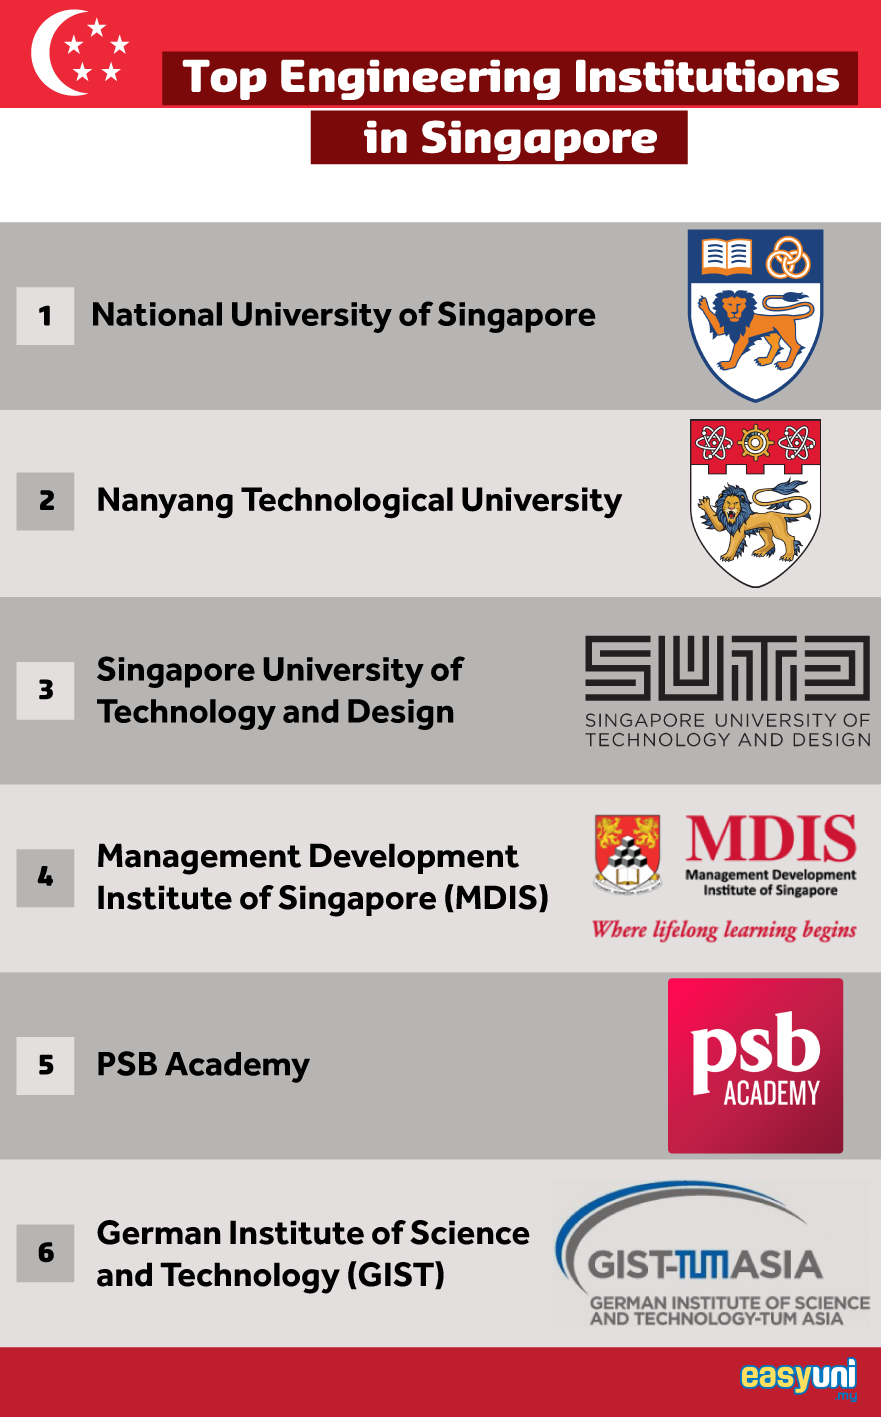 Top Engineering Institutions in Singapore Infographic